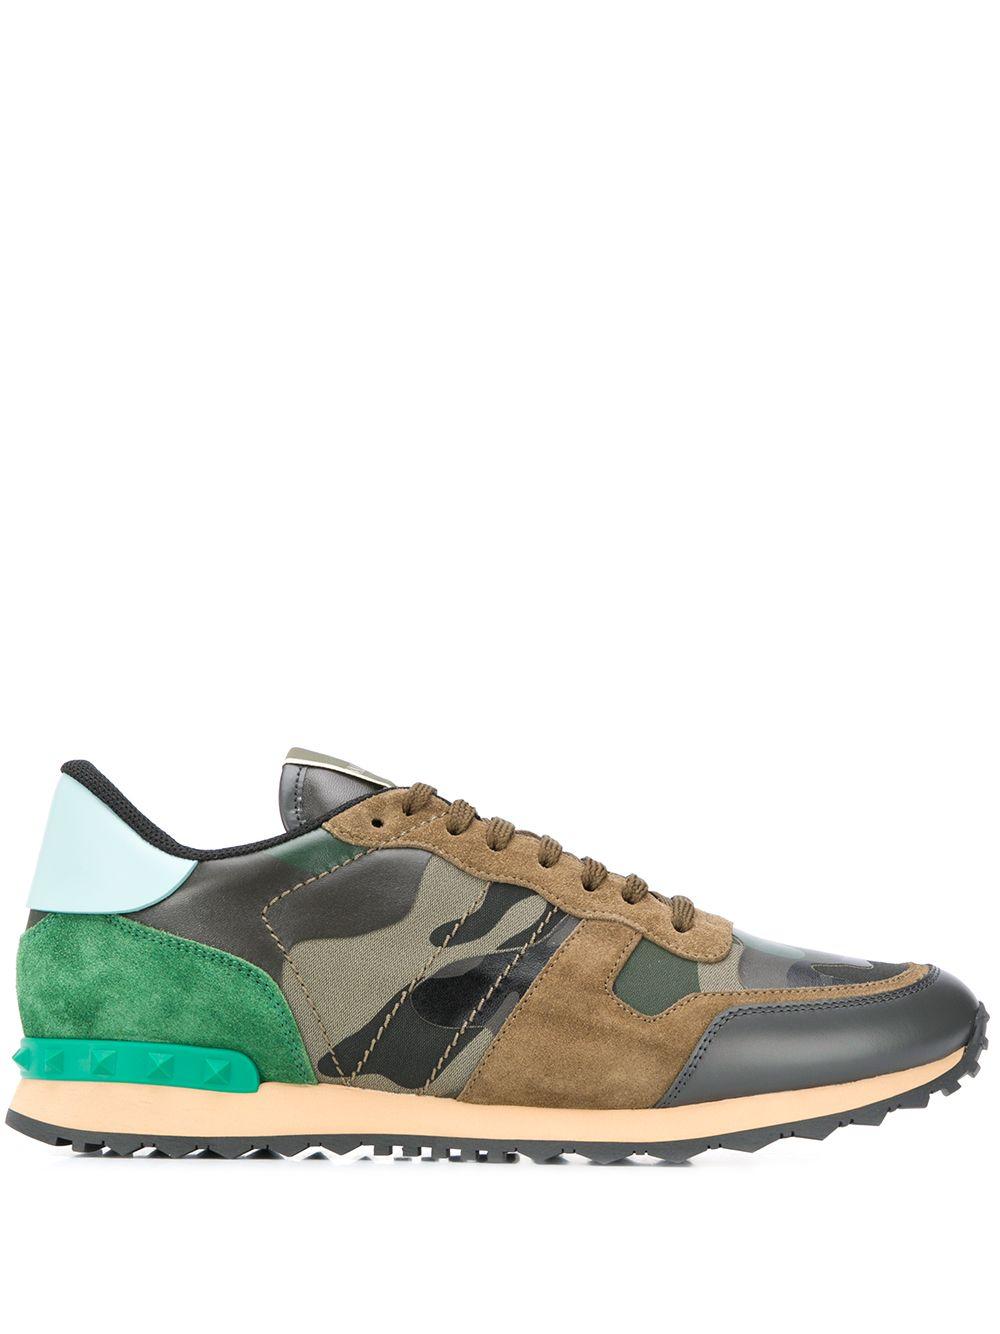 Valentino Garavani Leather Camouflage Rockrunner Sneakers in Green for Men  - Save 62% - Lyst